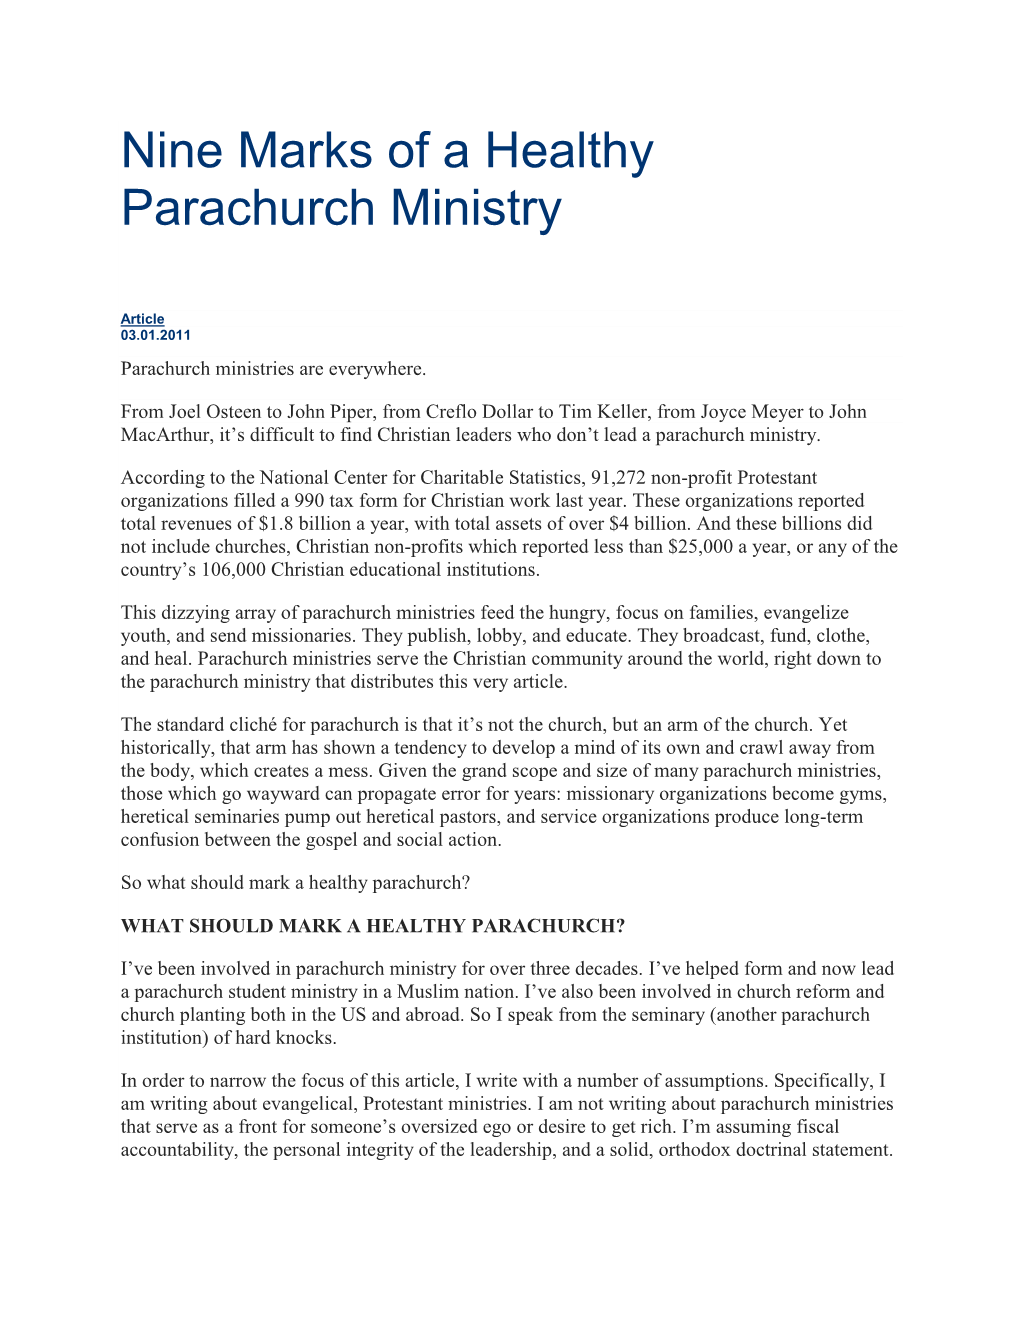 Nine Marks of a Healthy Parachurch Ministry